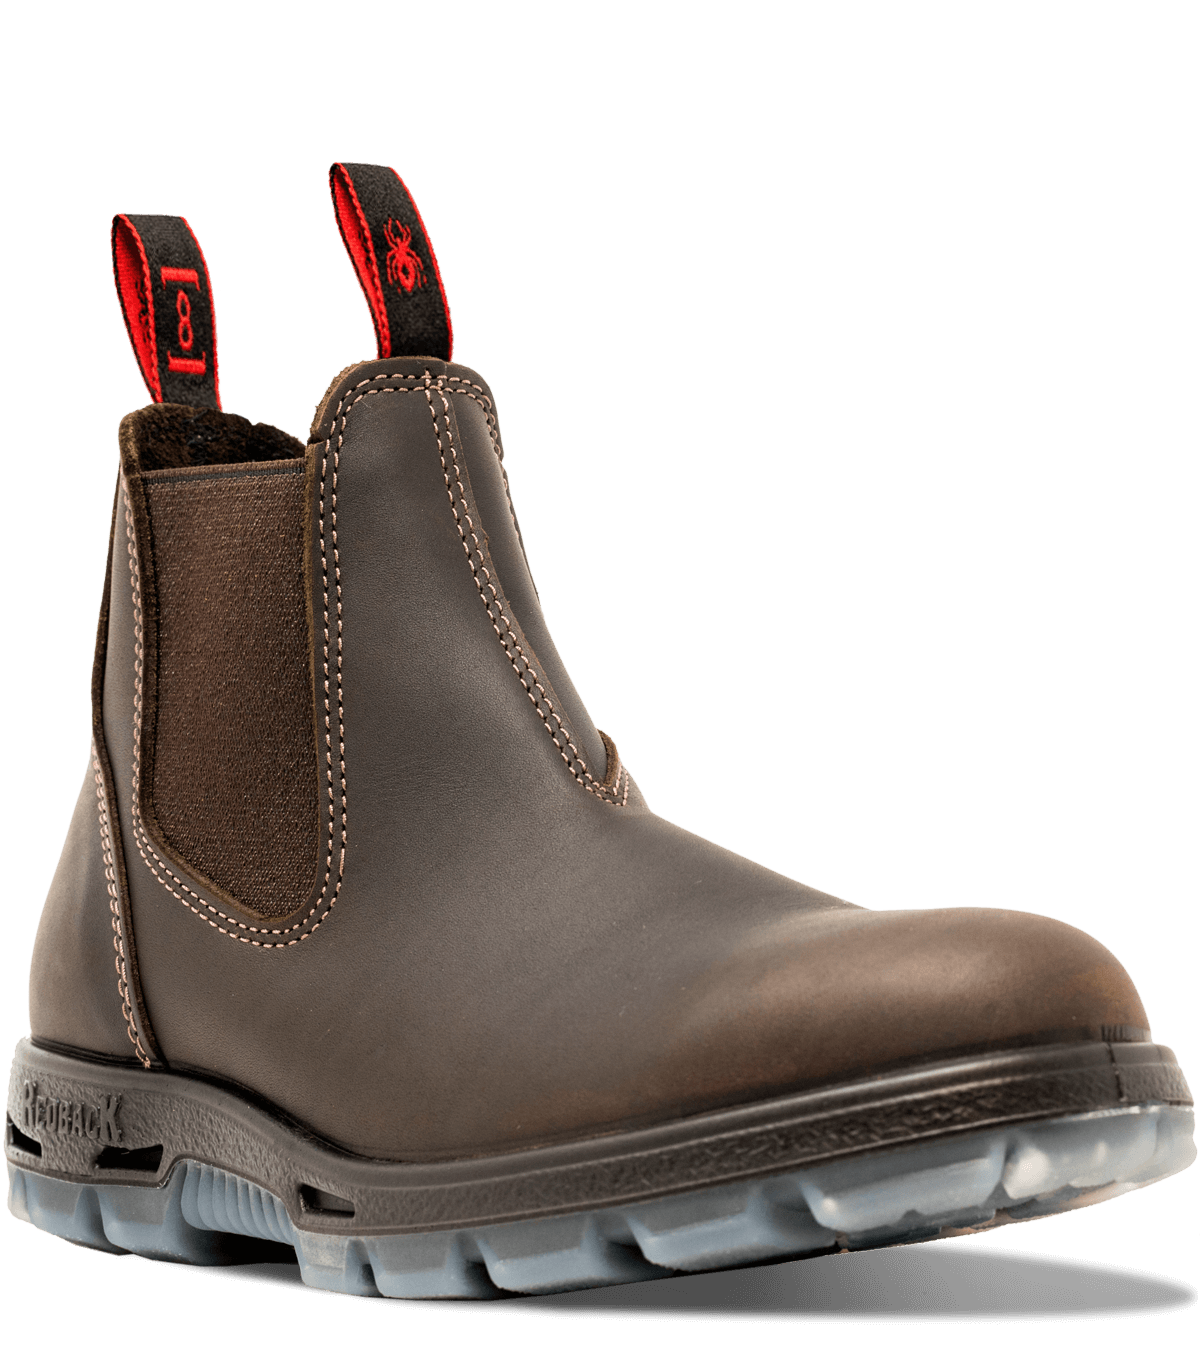 Great Barrier | Redback Boots®